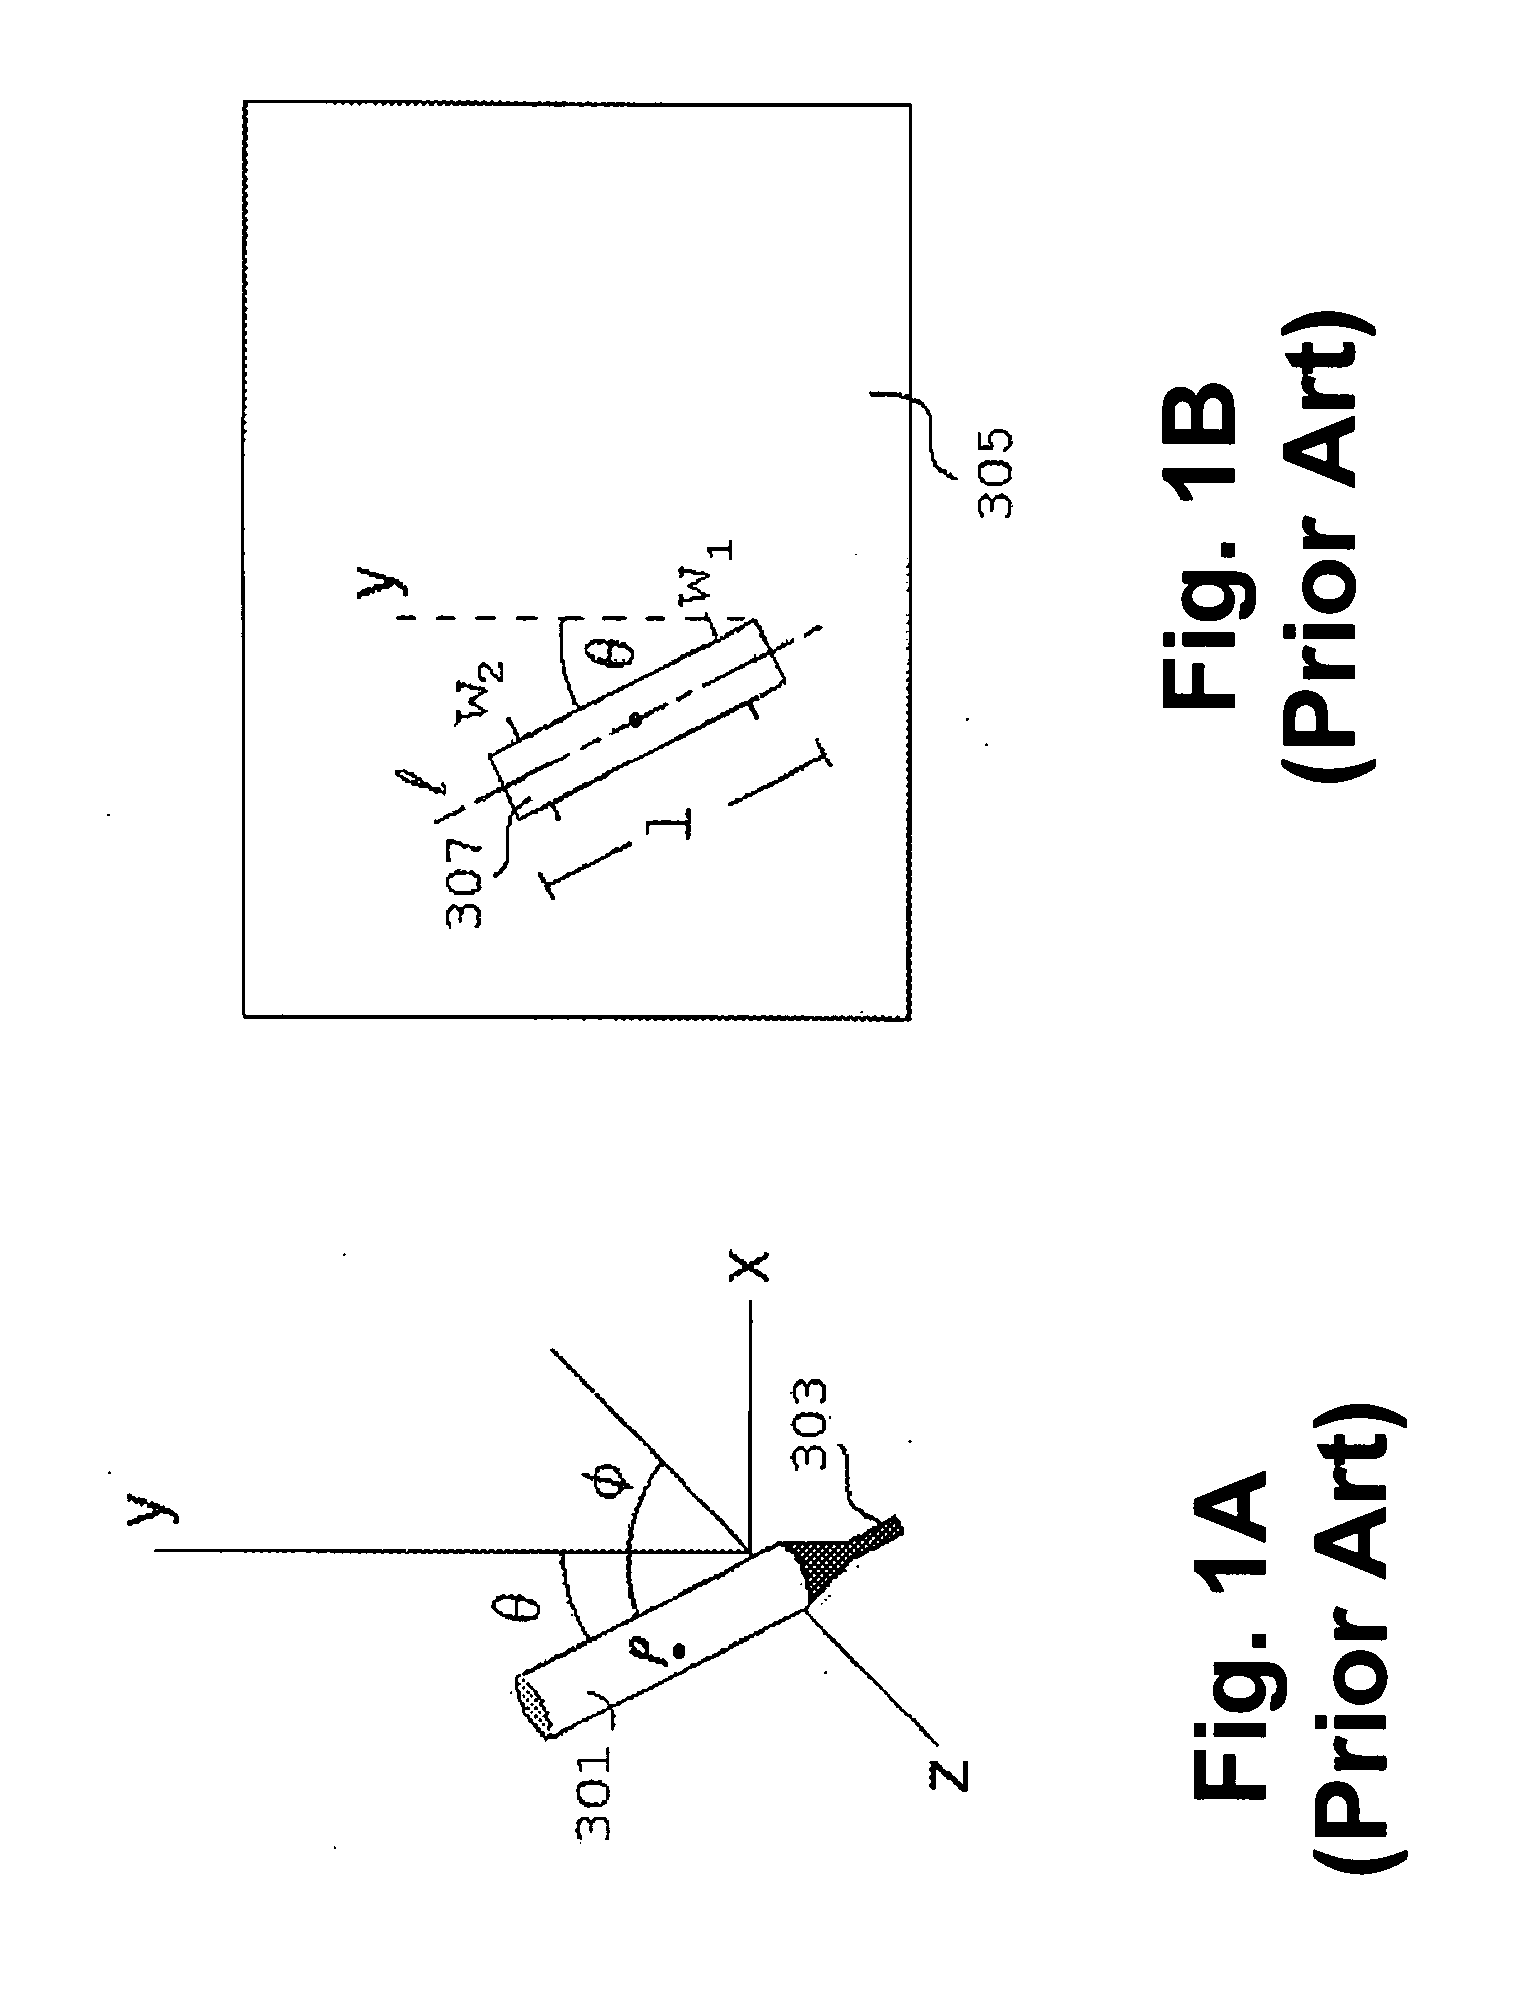 Object-based 3-dimensional stereo information generation apparatus and method, and interactive system using the same